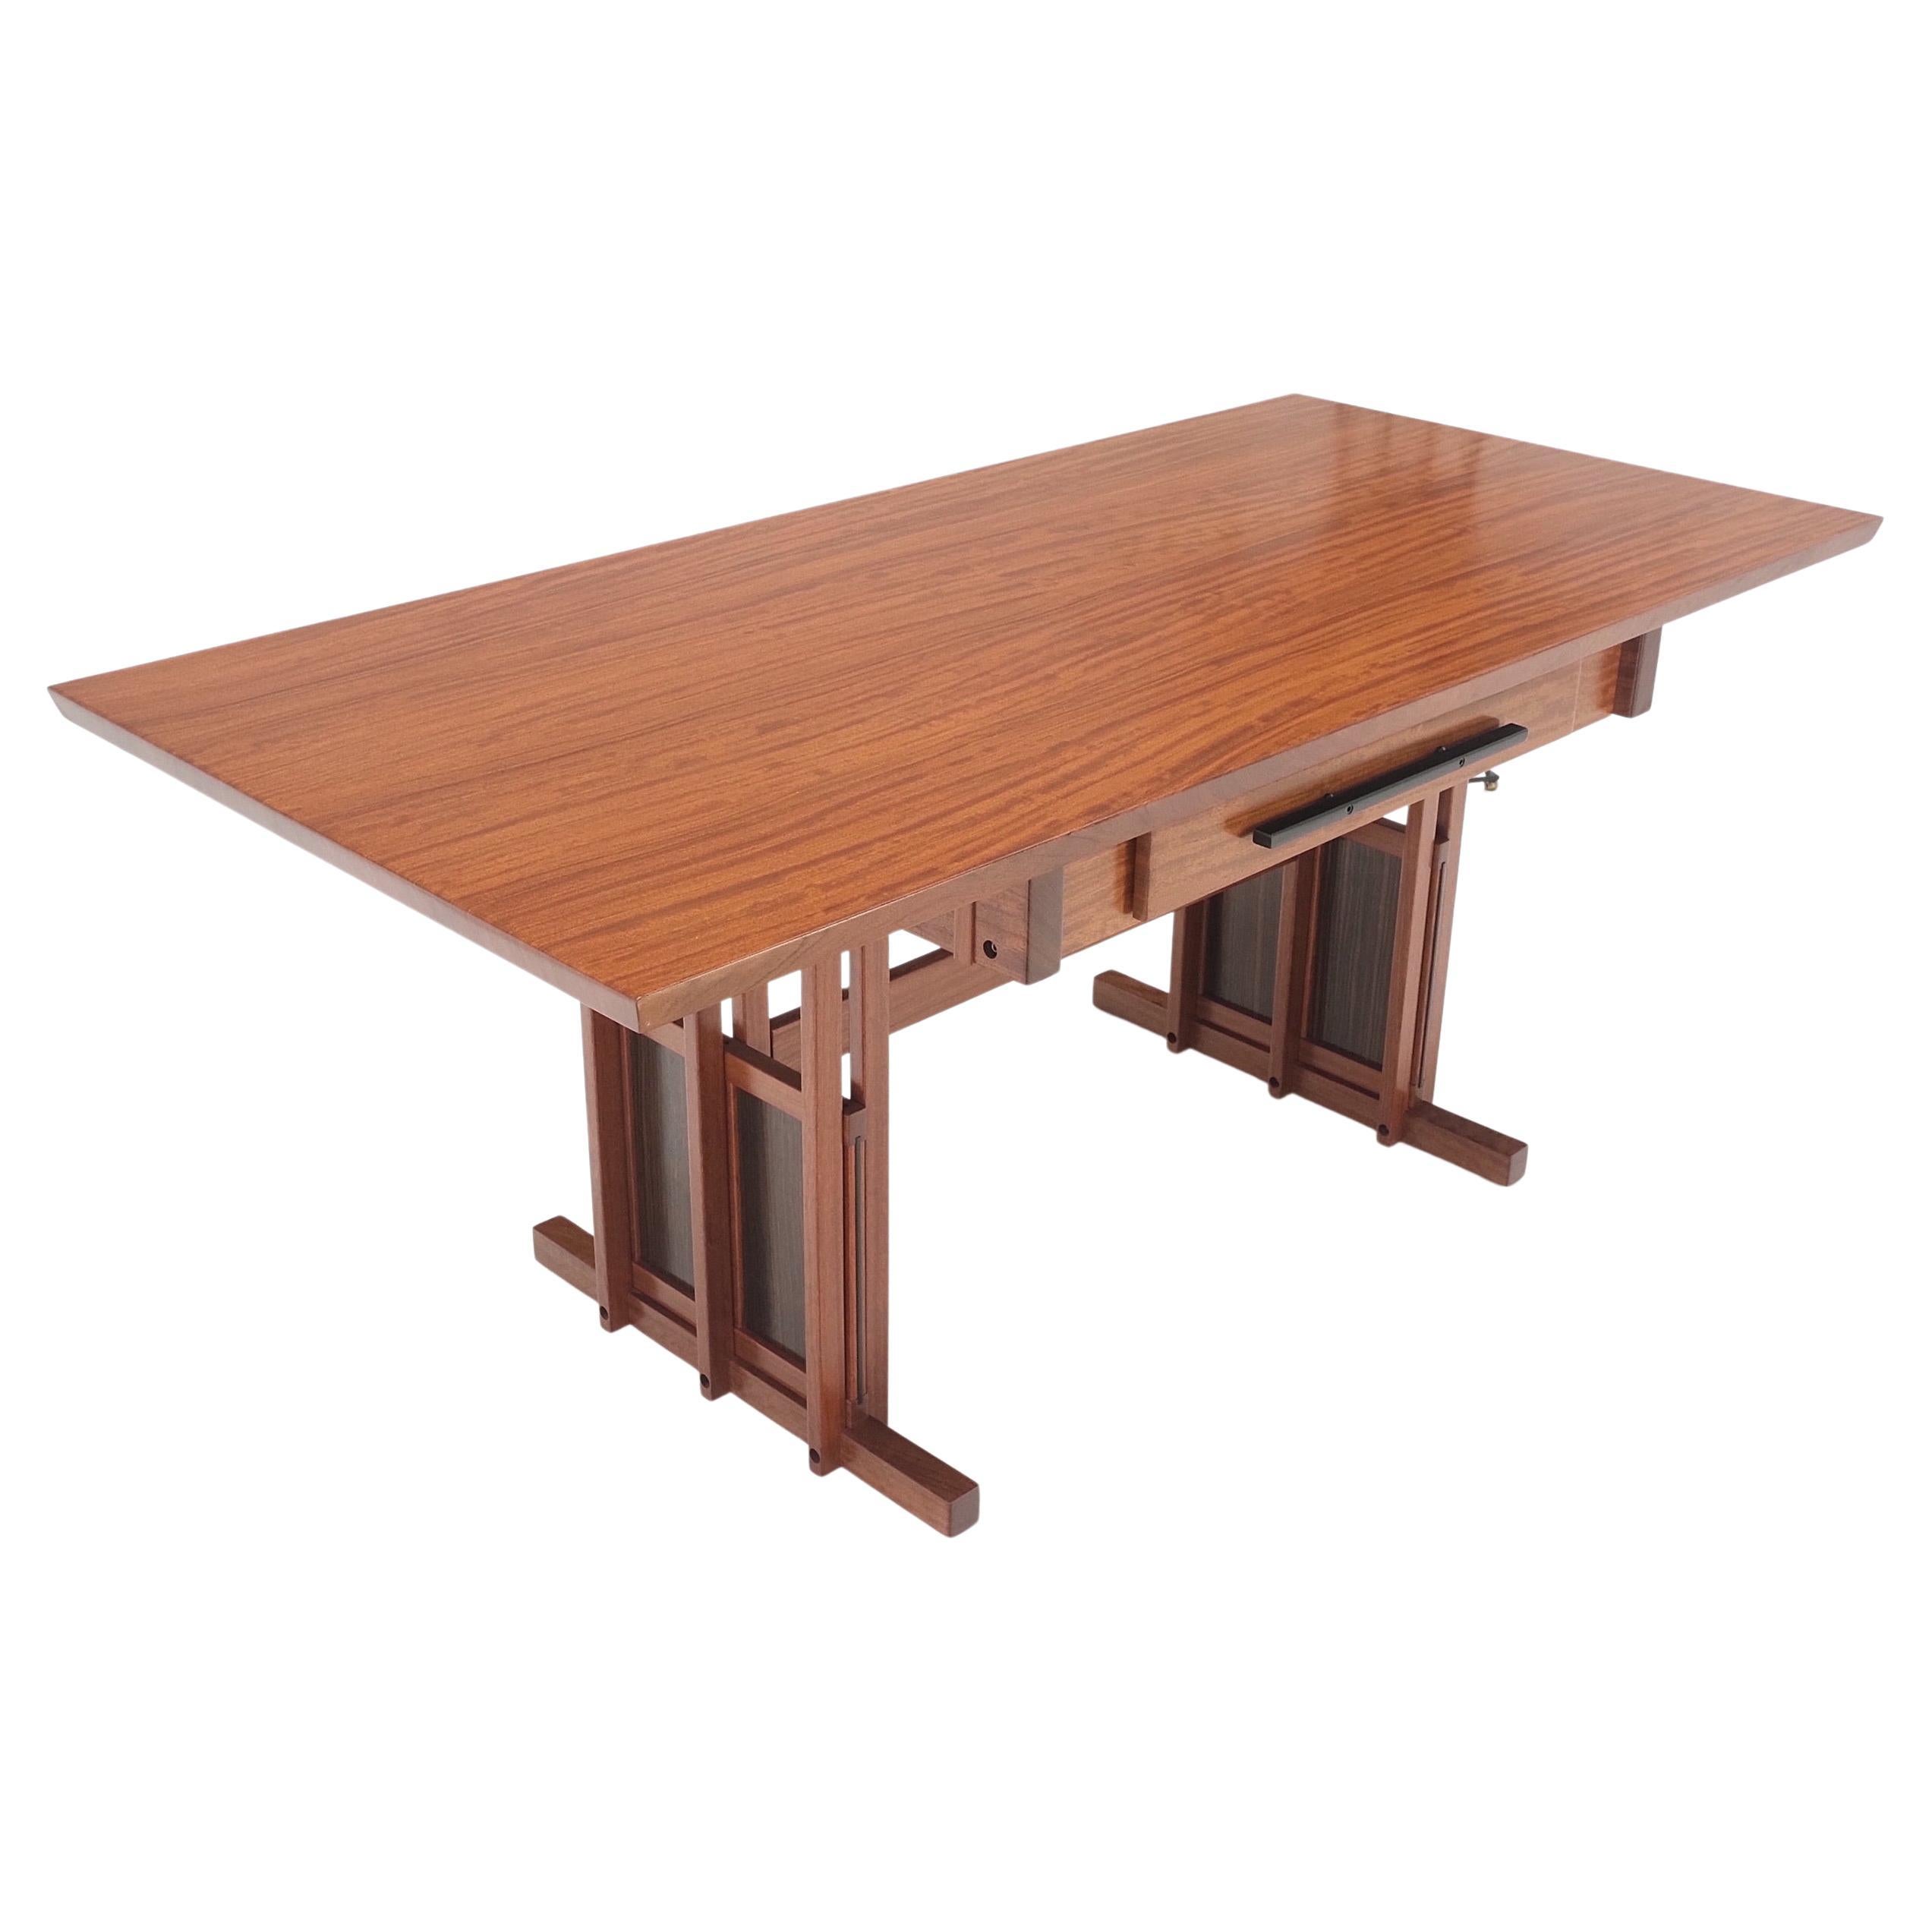 All Solid Teak Top and Base Architectural Studio Made Partners Desk Mint! For Sale